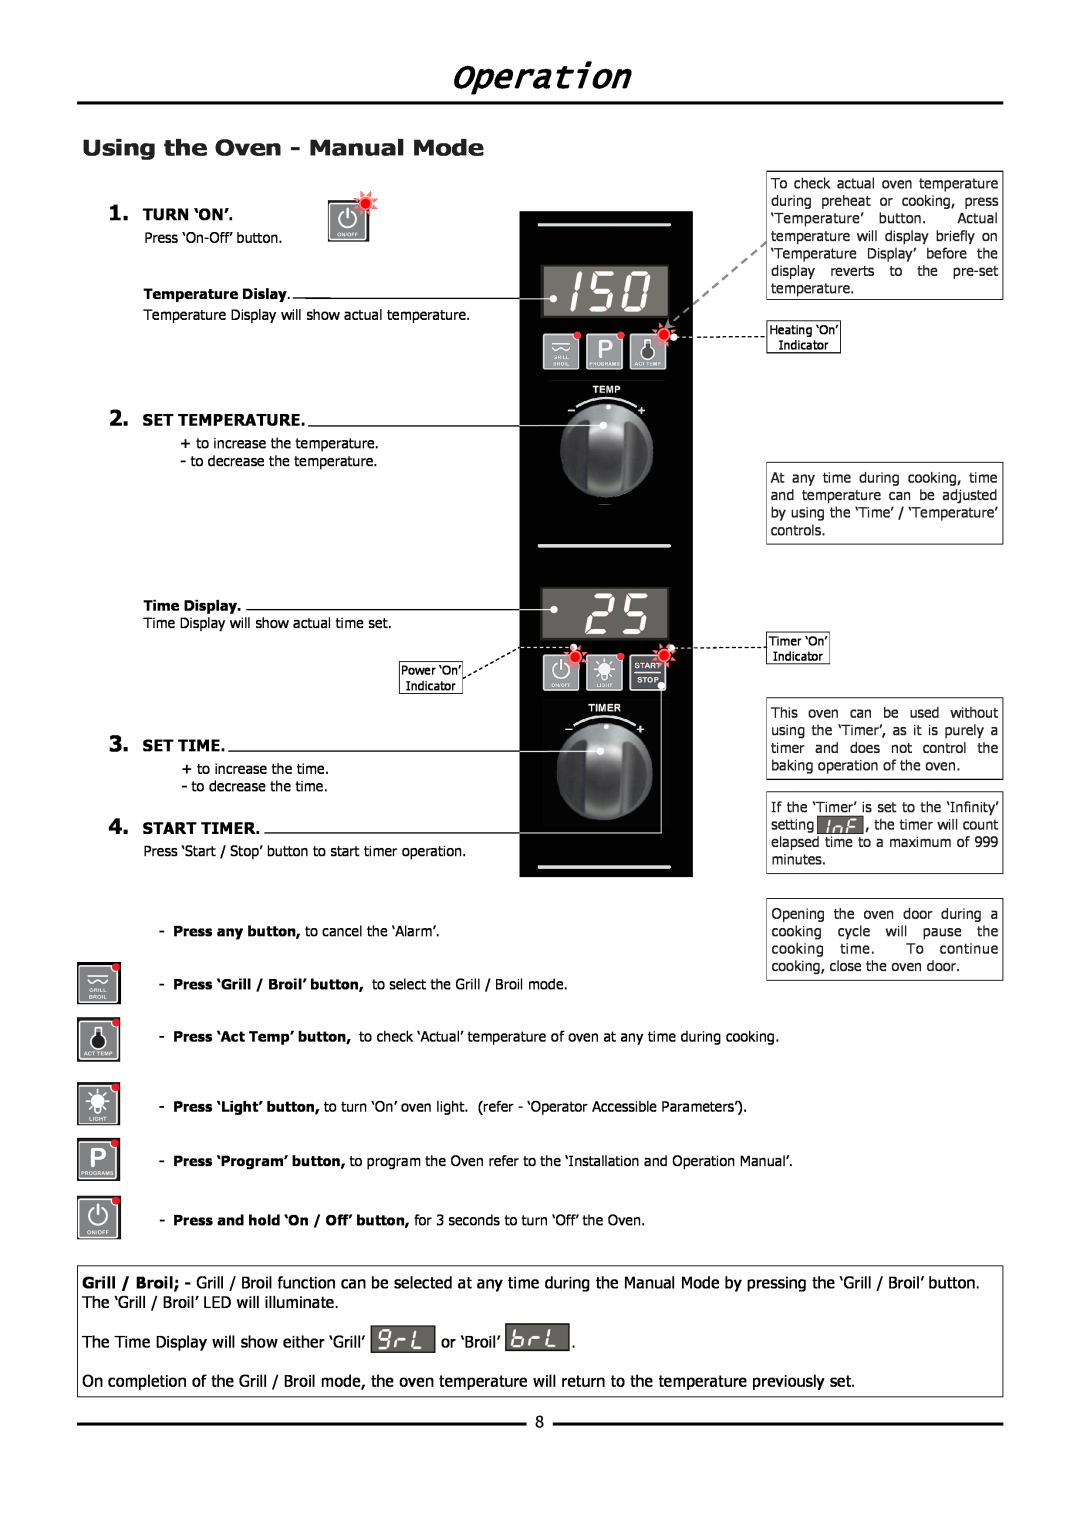 Moffat E31D4 operation manual Using the Oven - Manual Mode, Operation, Turn ‘On’, Set Temperature, Set Time, Start Timer 